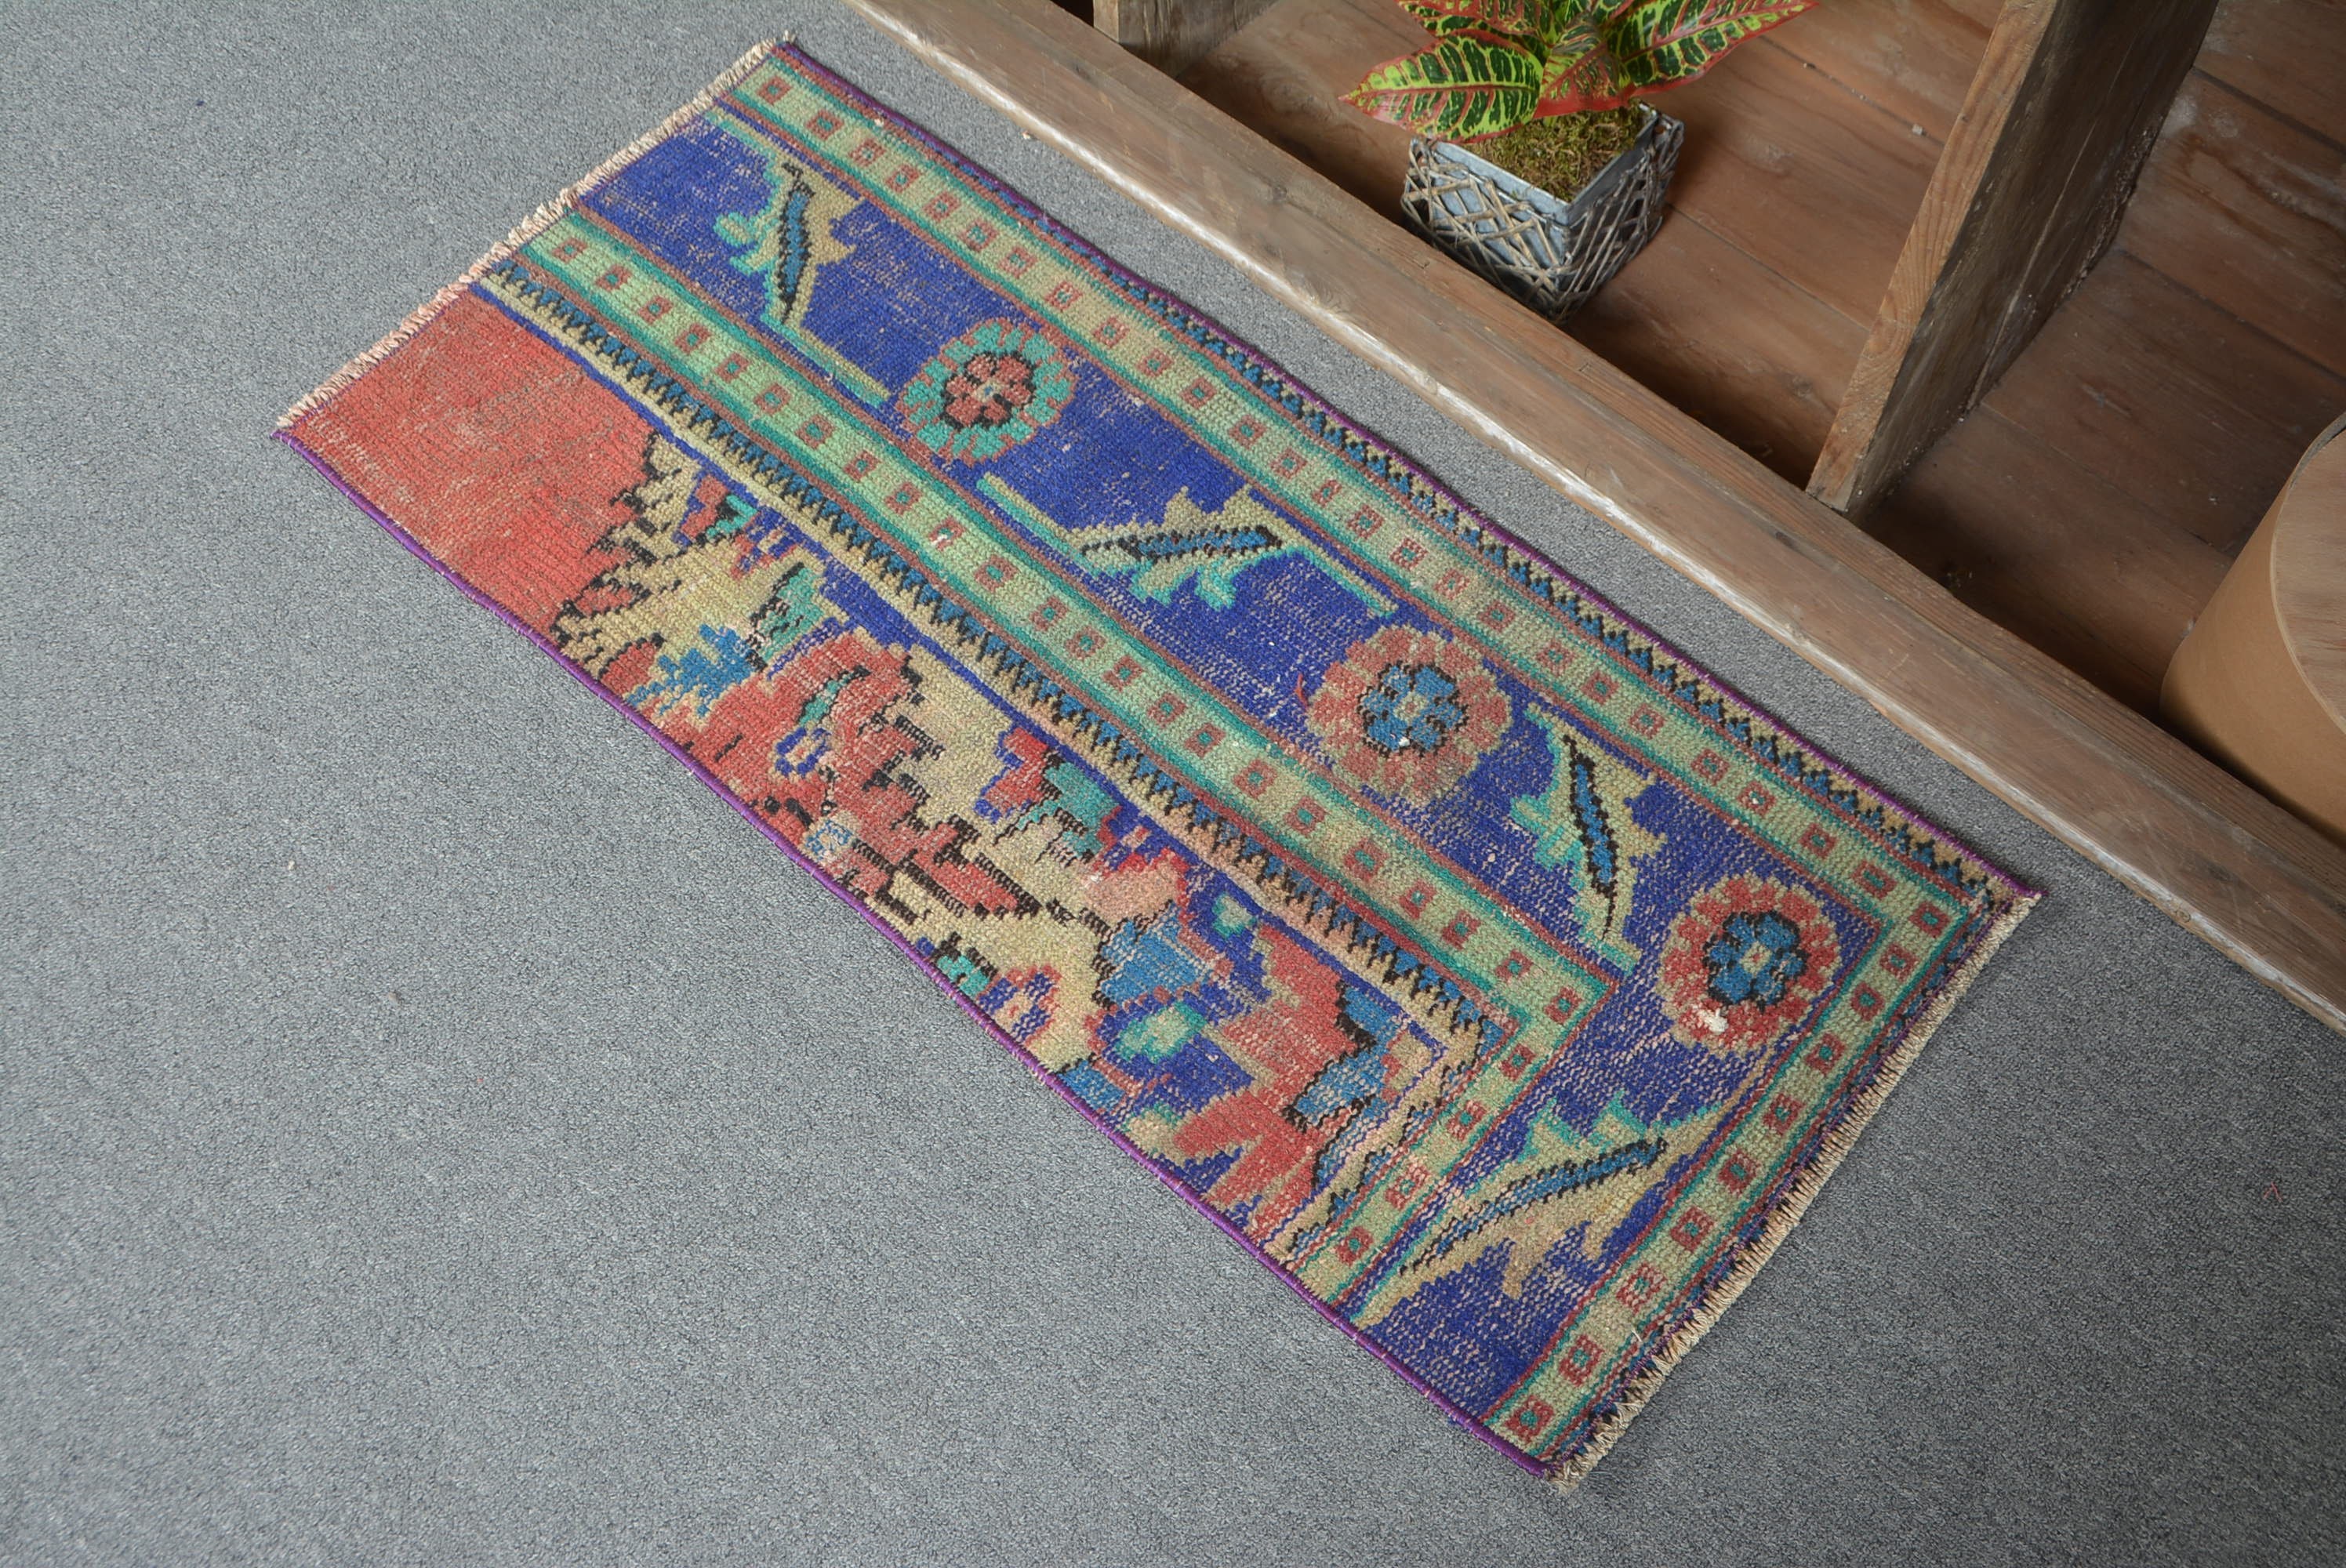 Wool Bath Mat Rugs, Rugs for Entry, Entry Rug, Colorful Rugs, 1.5x3.3 ft Small Rug, Car Mat Rug, Floor Rug, Vintage Rug, Turkish Rugs